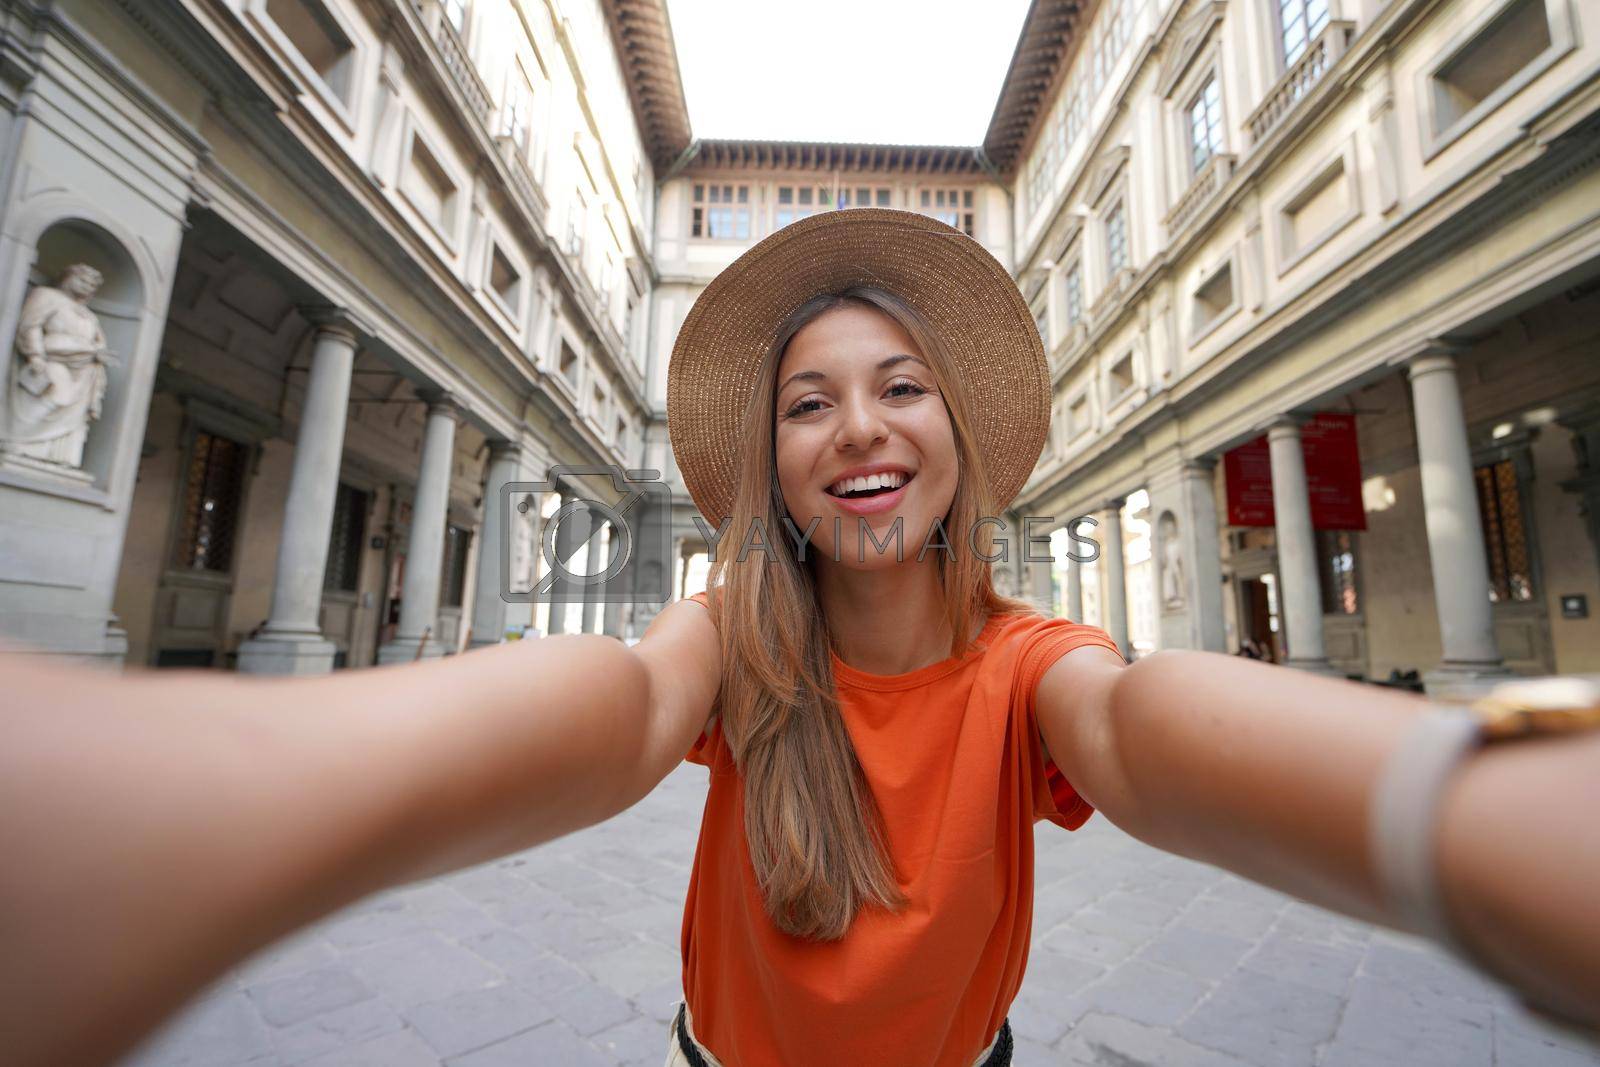 Royalty free image of Self portrait of young tourist woman in courtyard of historic Uffizi Gallery art museum in Florence, Tuscany, Italy by sergio_monti